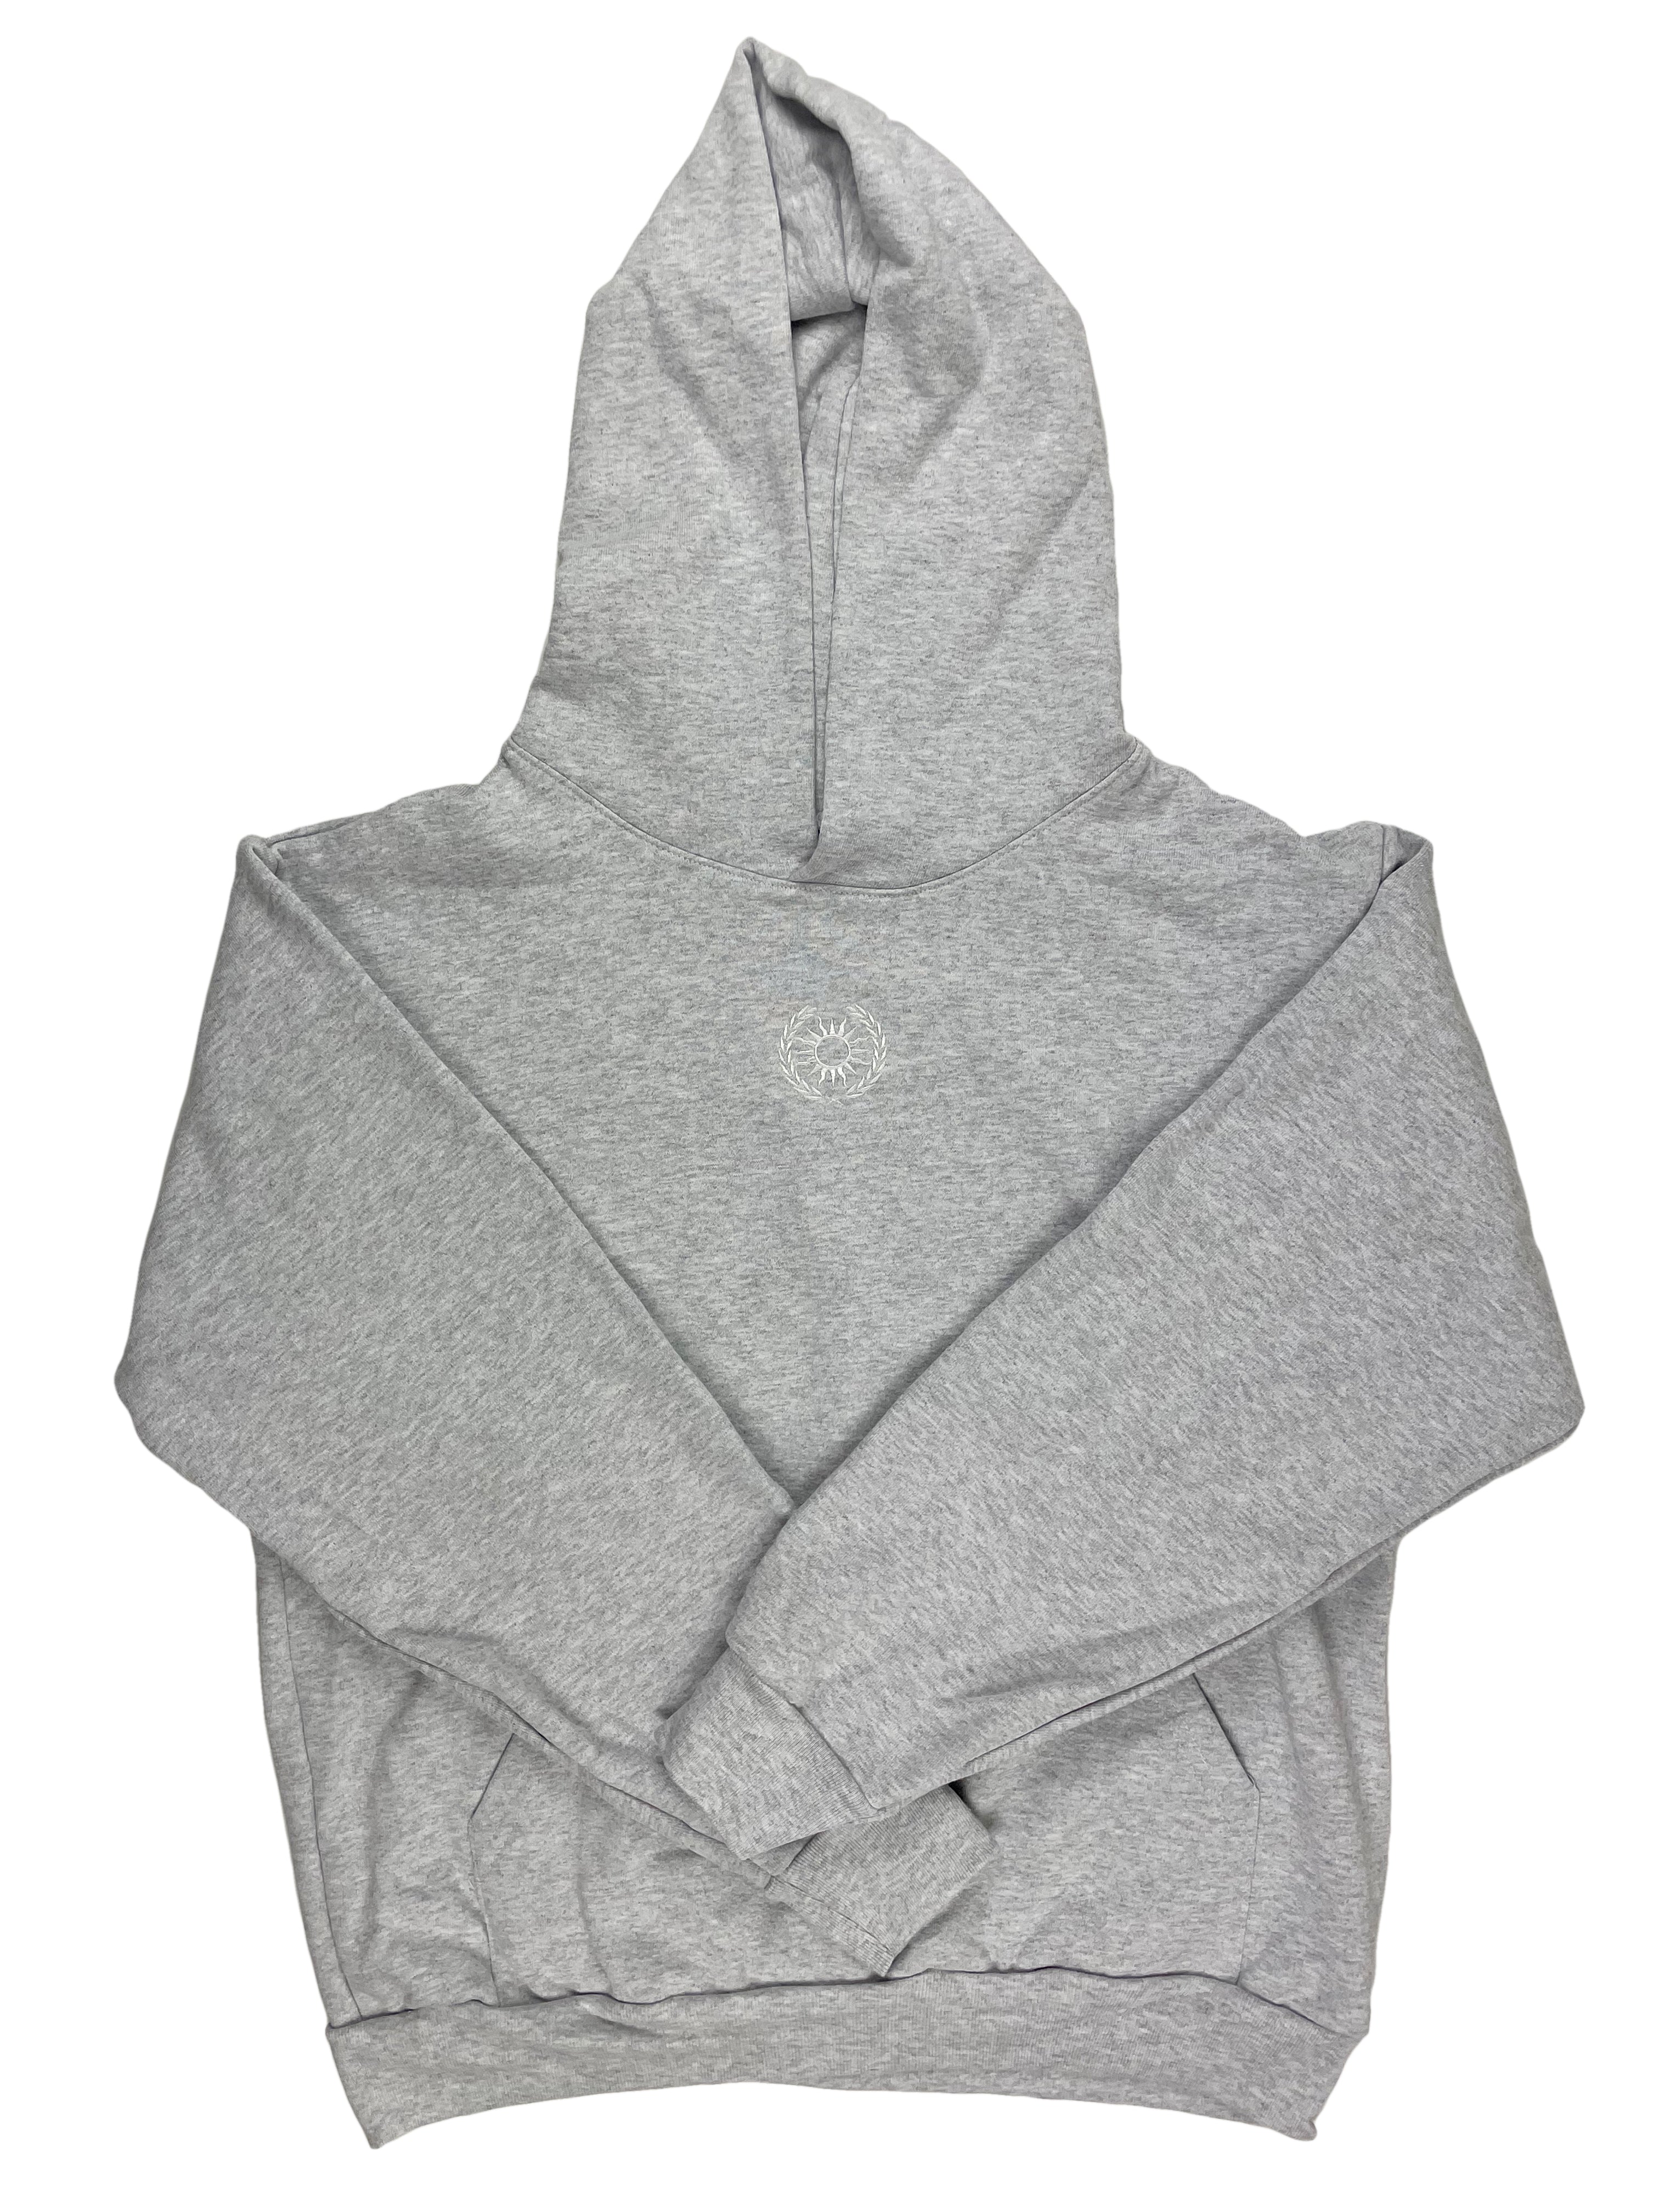 100% cotton hoodie in grey with white embroidered sol apparel logo